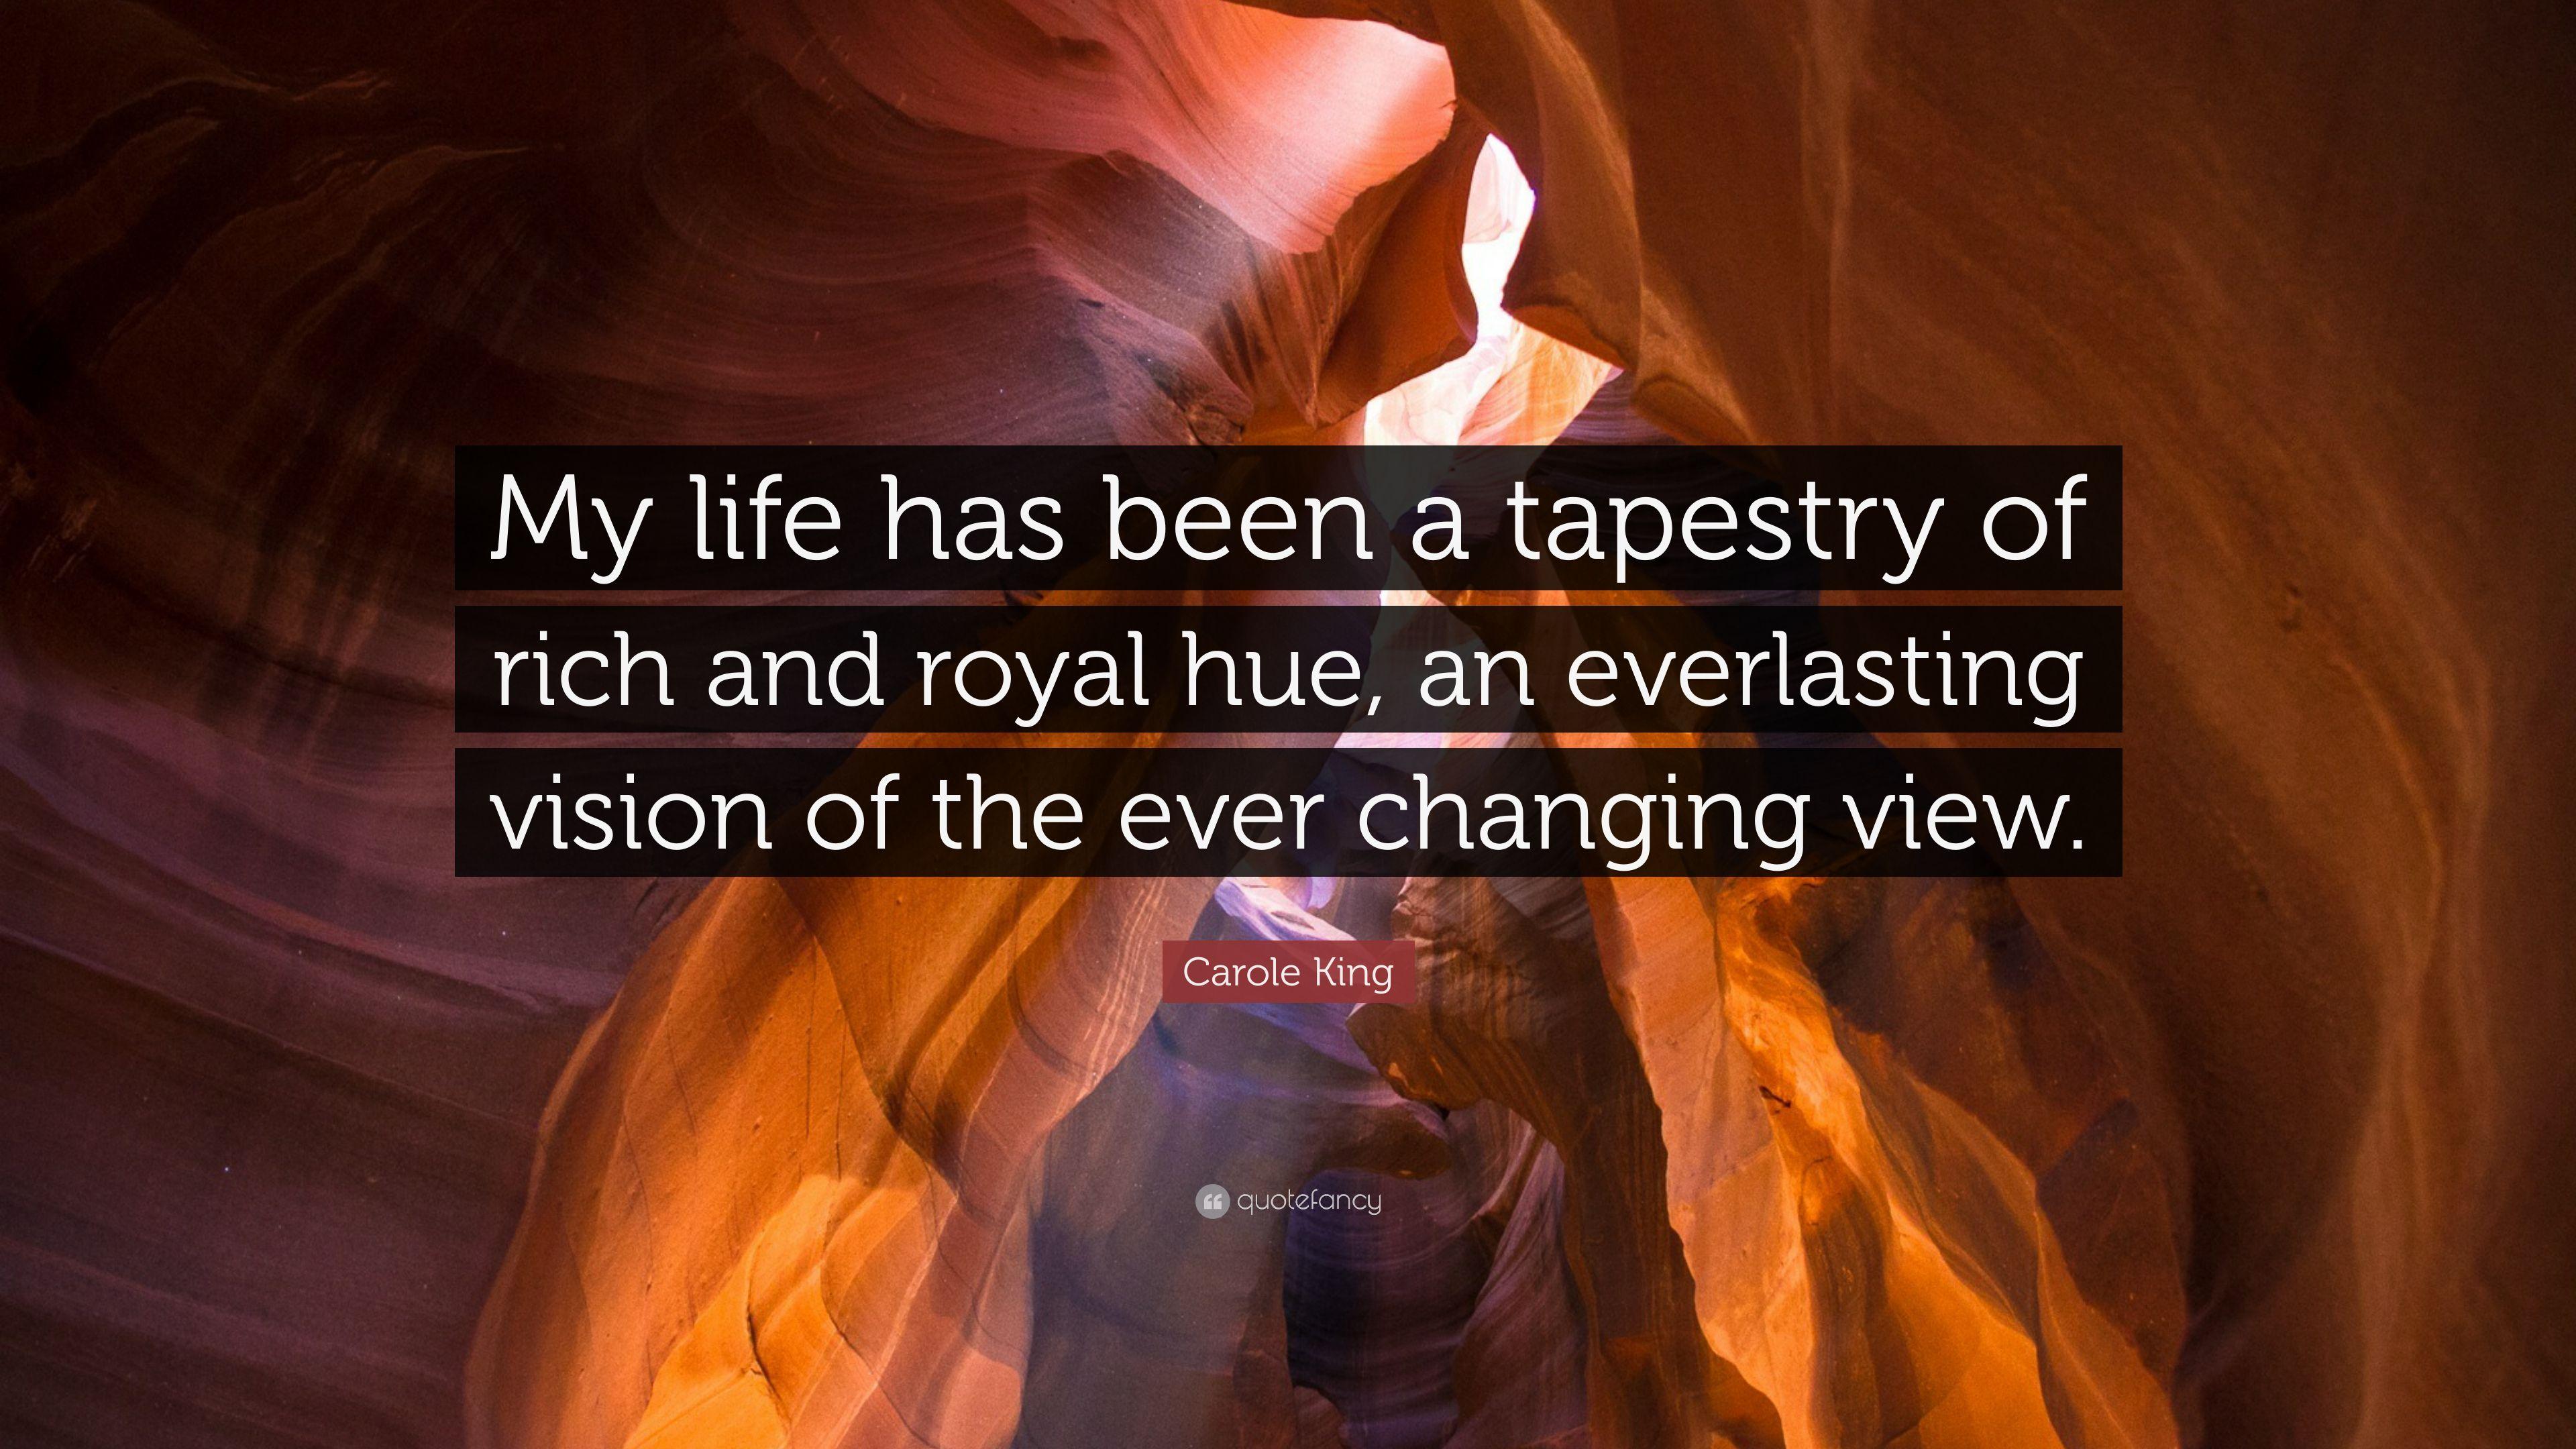 Carole King Quote: “My life has been a tapestry of rich and royal